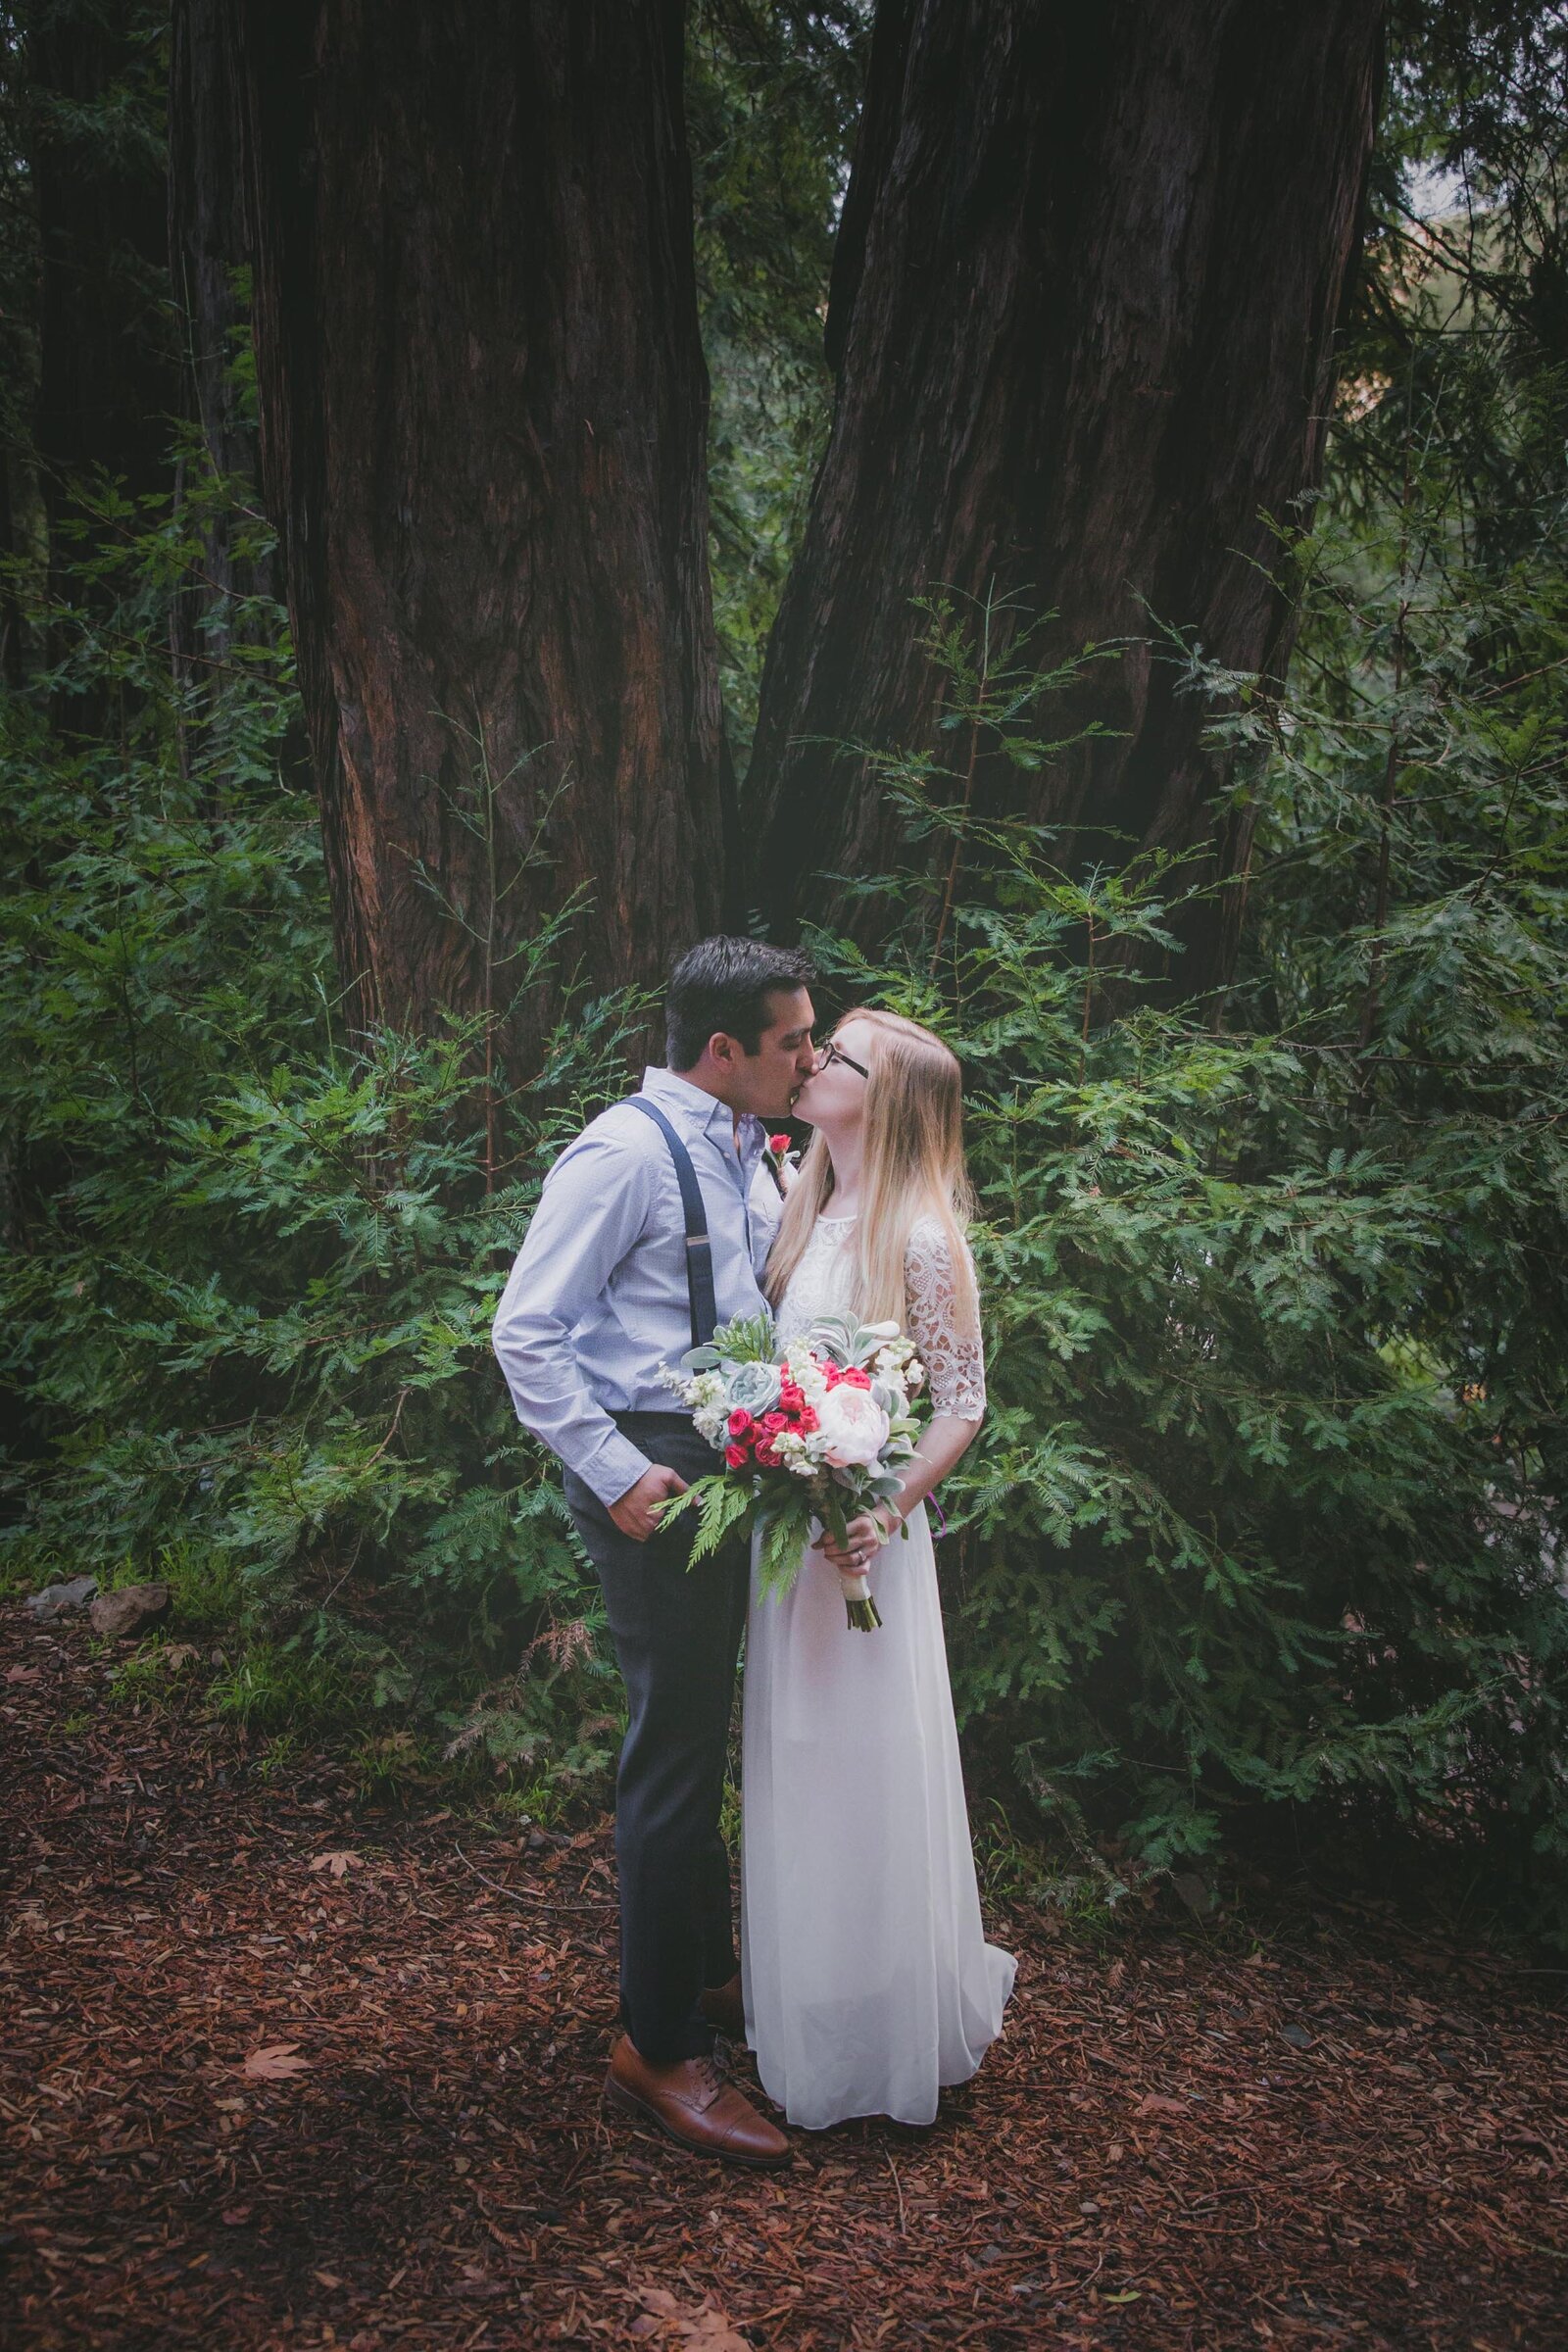 A Couple kisses with redwoods surrounding them.